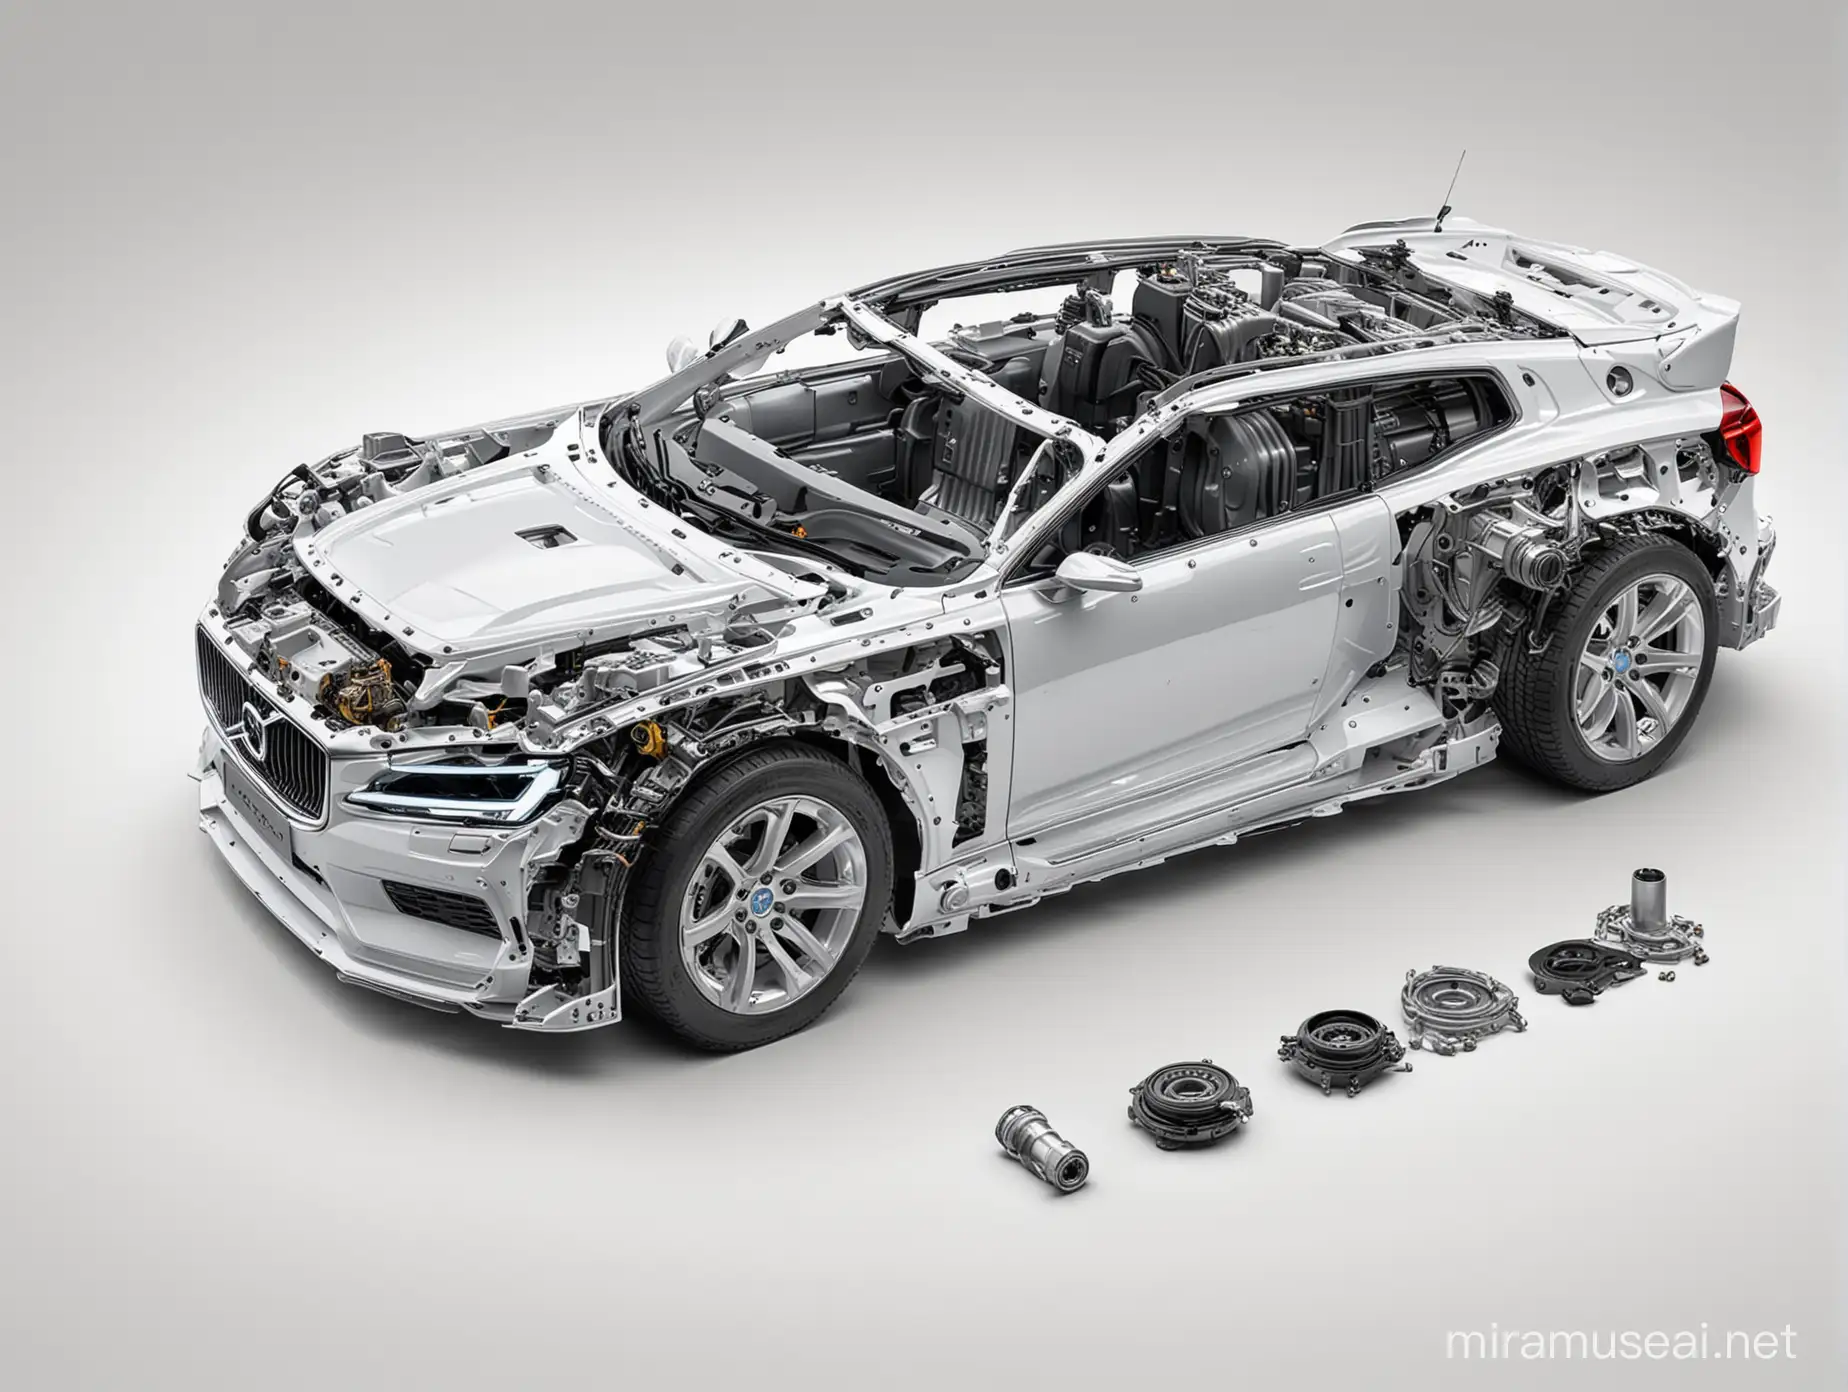 Volvo Spare Part Integration with Vehicle Component Seamless Enhancement